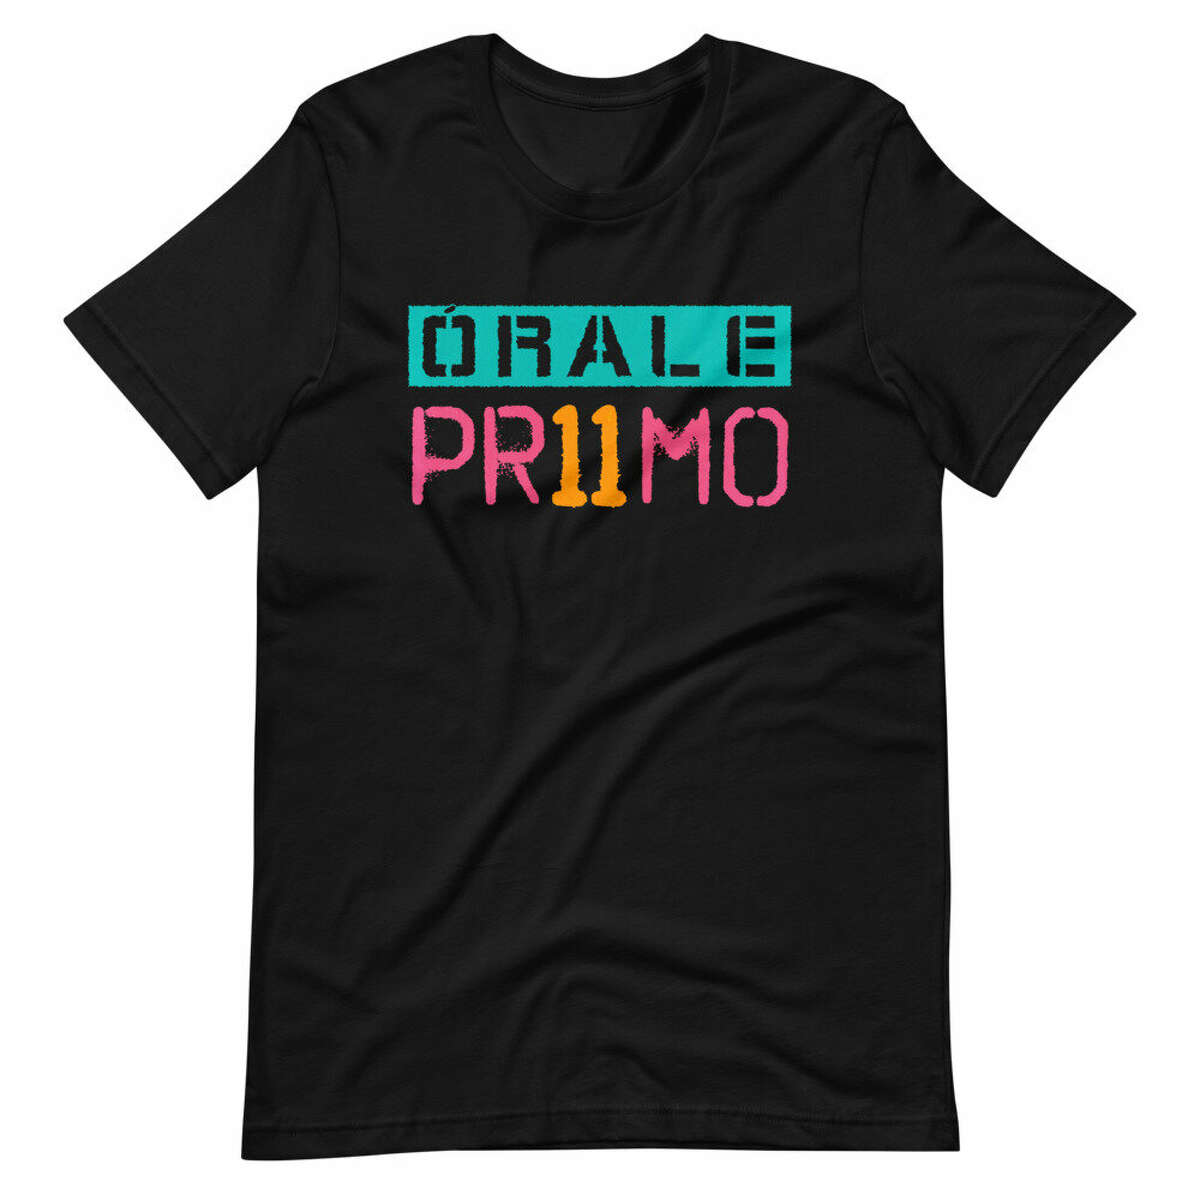 A new spraypaint-style "Orale Primo" shirt is up for grabs thanks to mega fan Dakota Mitchell. Mitchell, who grew up in the San Antonio, area has his finger on the pulse of what Spurs fans want. Embedded in the Spurs Twitter world, he's well-versed in the online jokes and terms of endearment tied to the Spurs. 